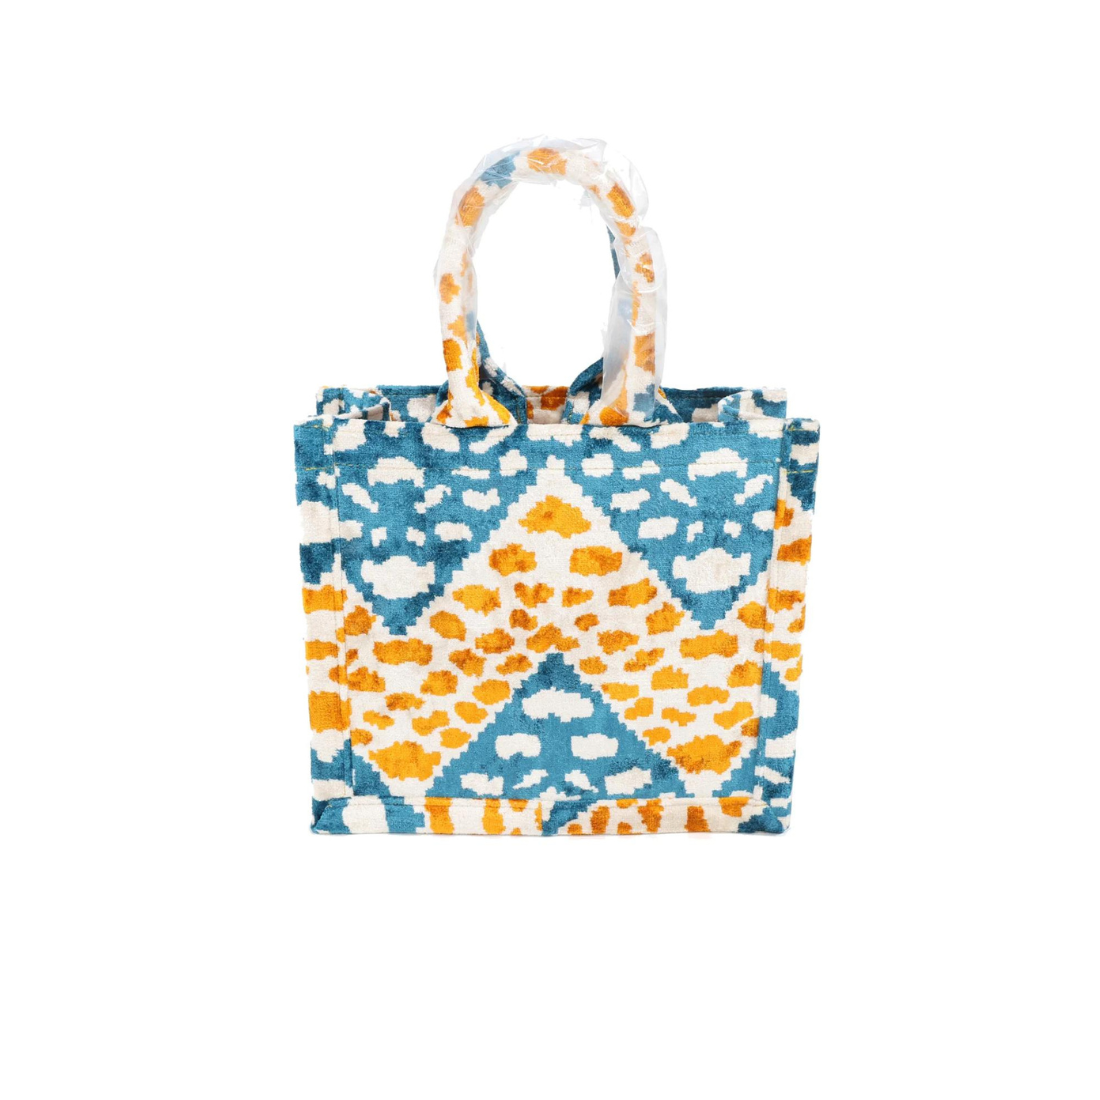 Luxury Small Tote Bag